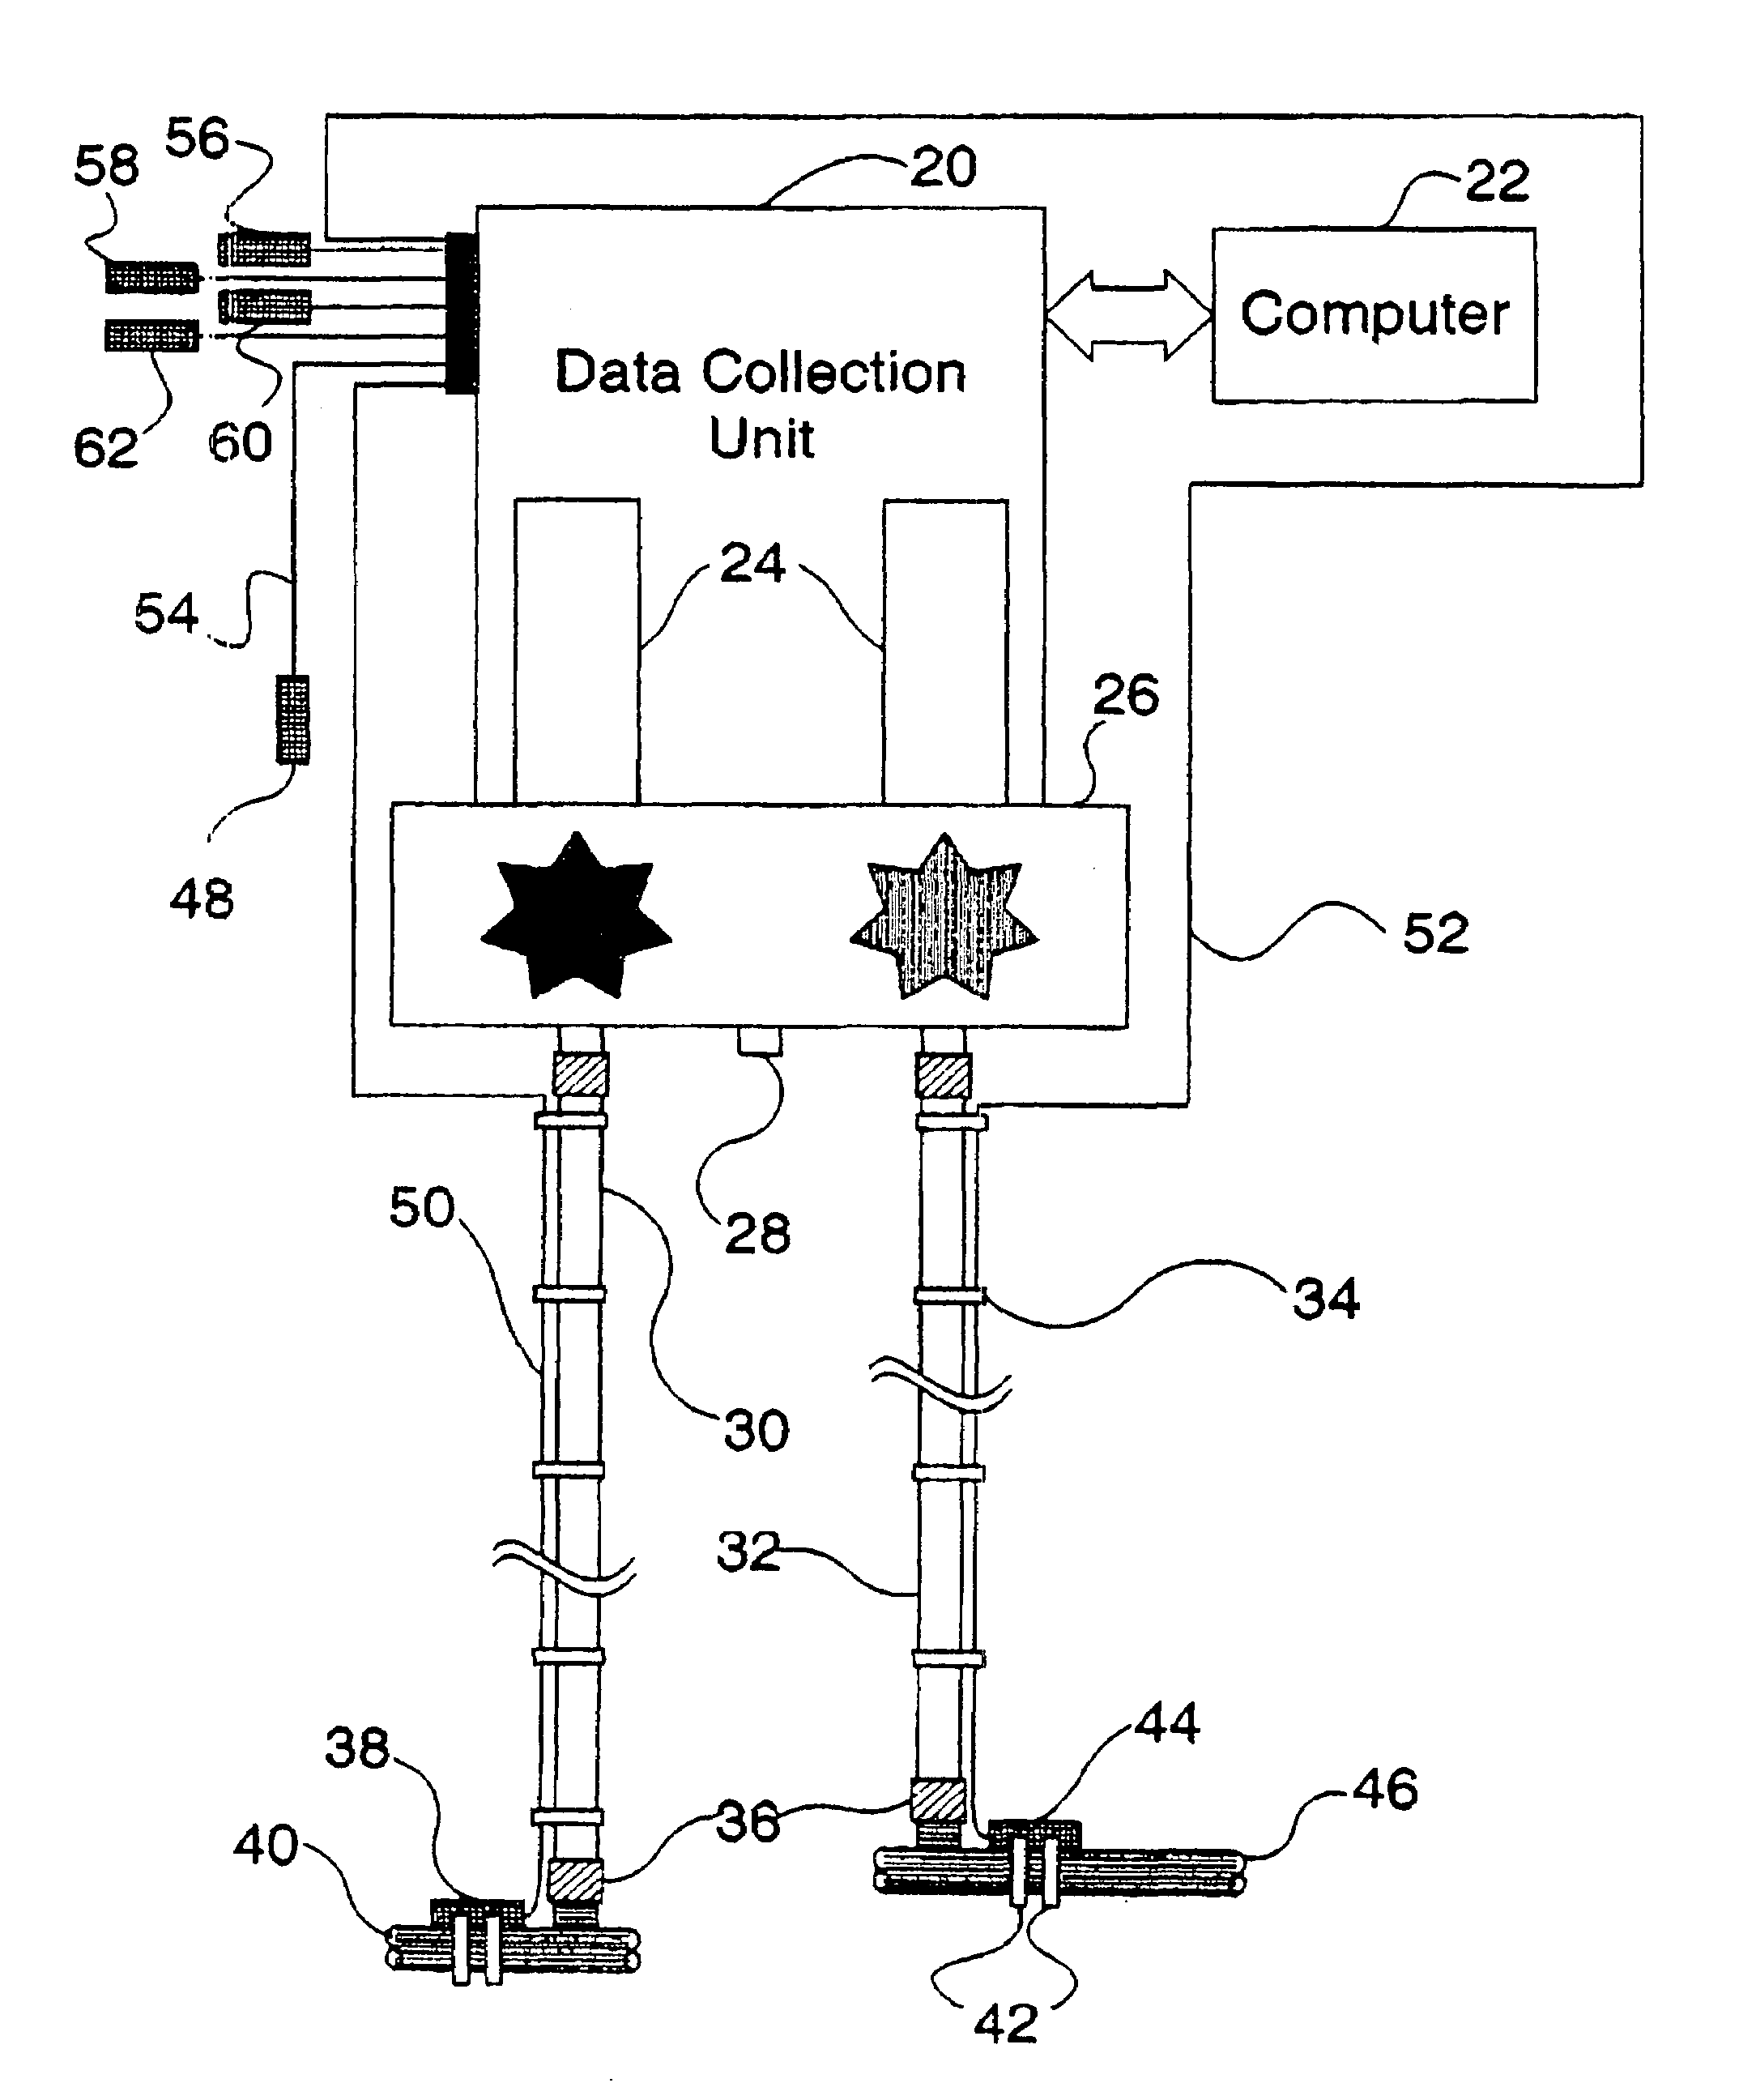 Apparatus and method for detecting faults and providing diagnostics in vapor compression cycle equipment